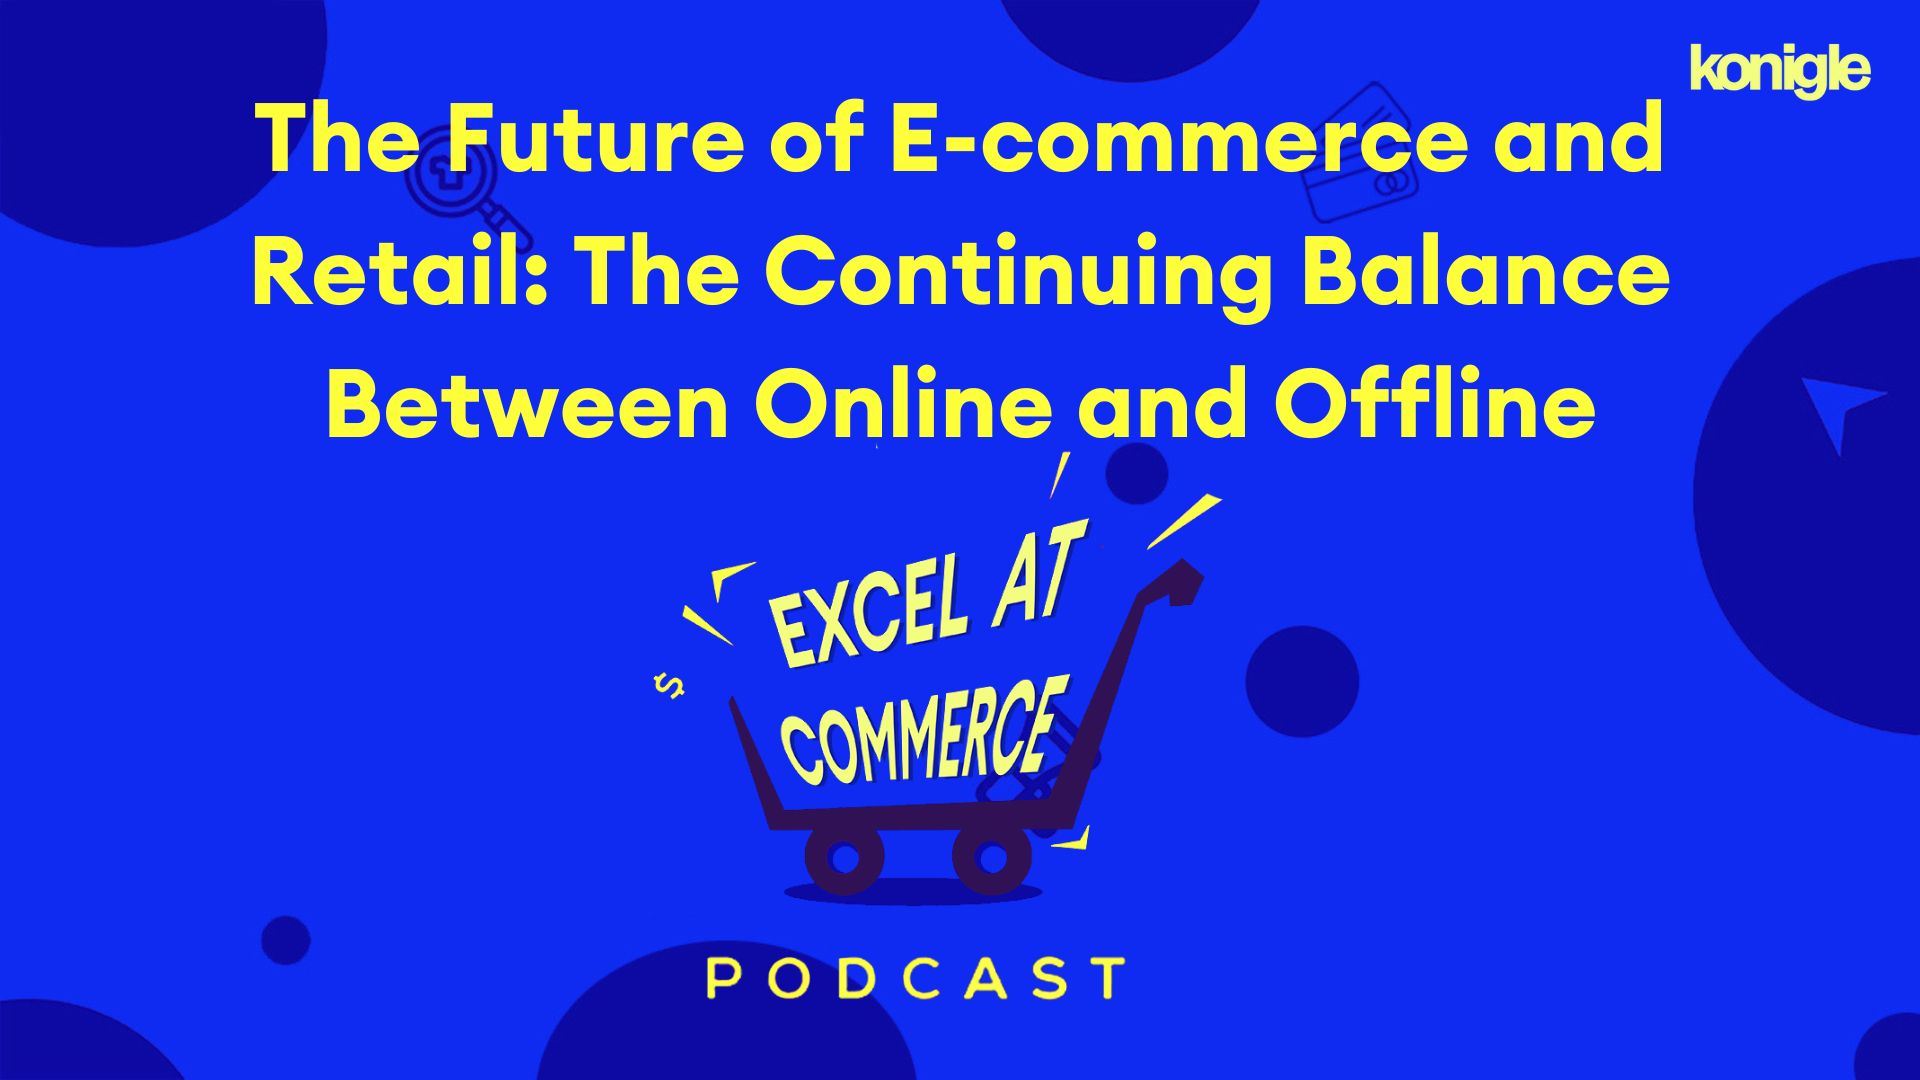 The Future of E-commerce and Retail: The Continuing Balance Between Online and Offline